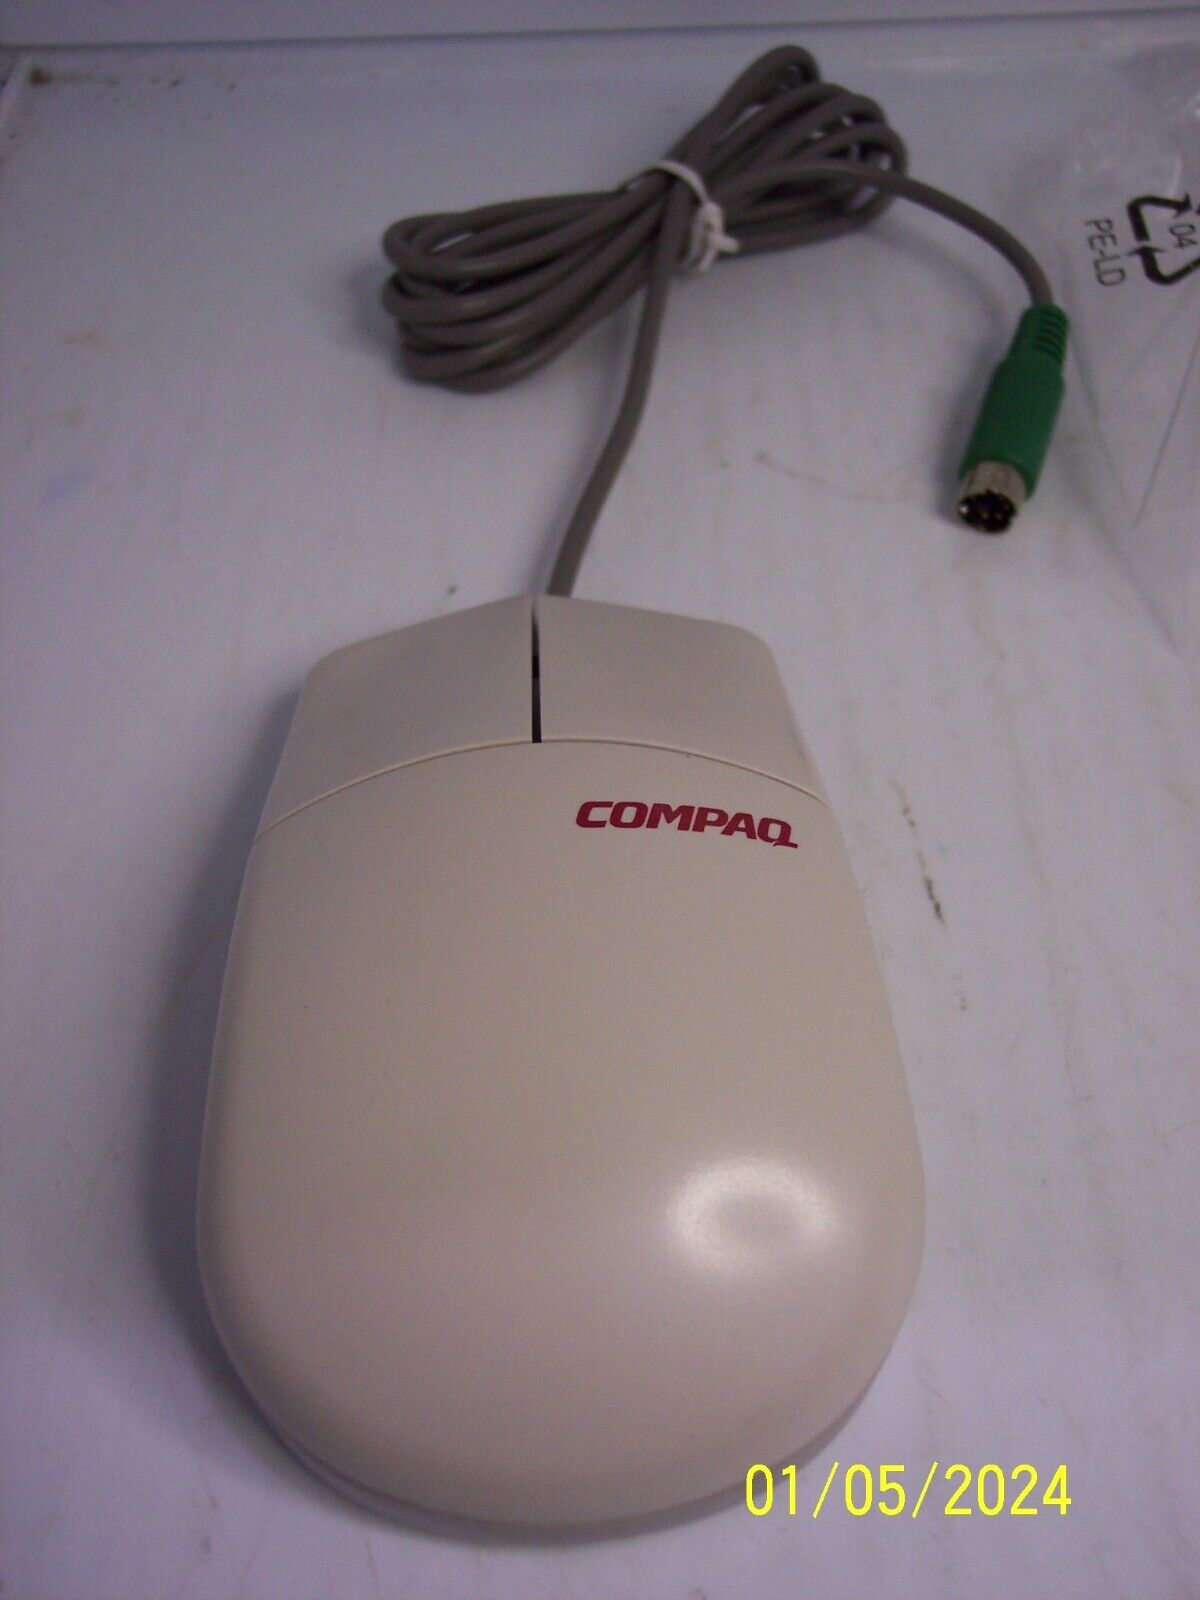 Vintage Compaq OEM MOUSE PS/2 MUS9J-N 149998-006  2 BUTTON Trackball IVORY NEW